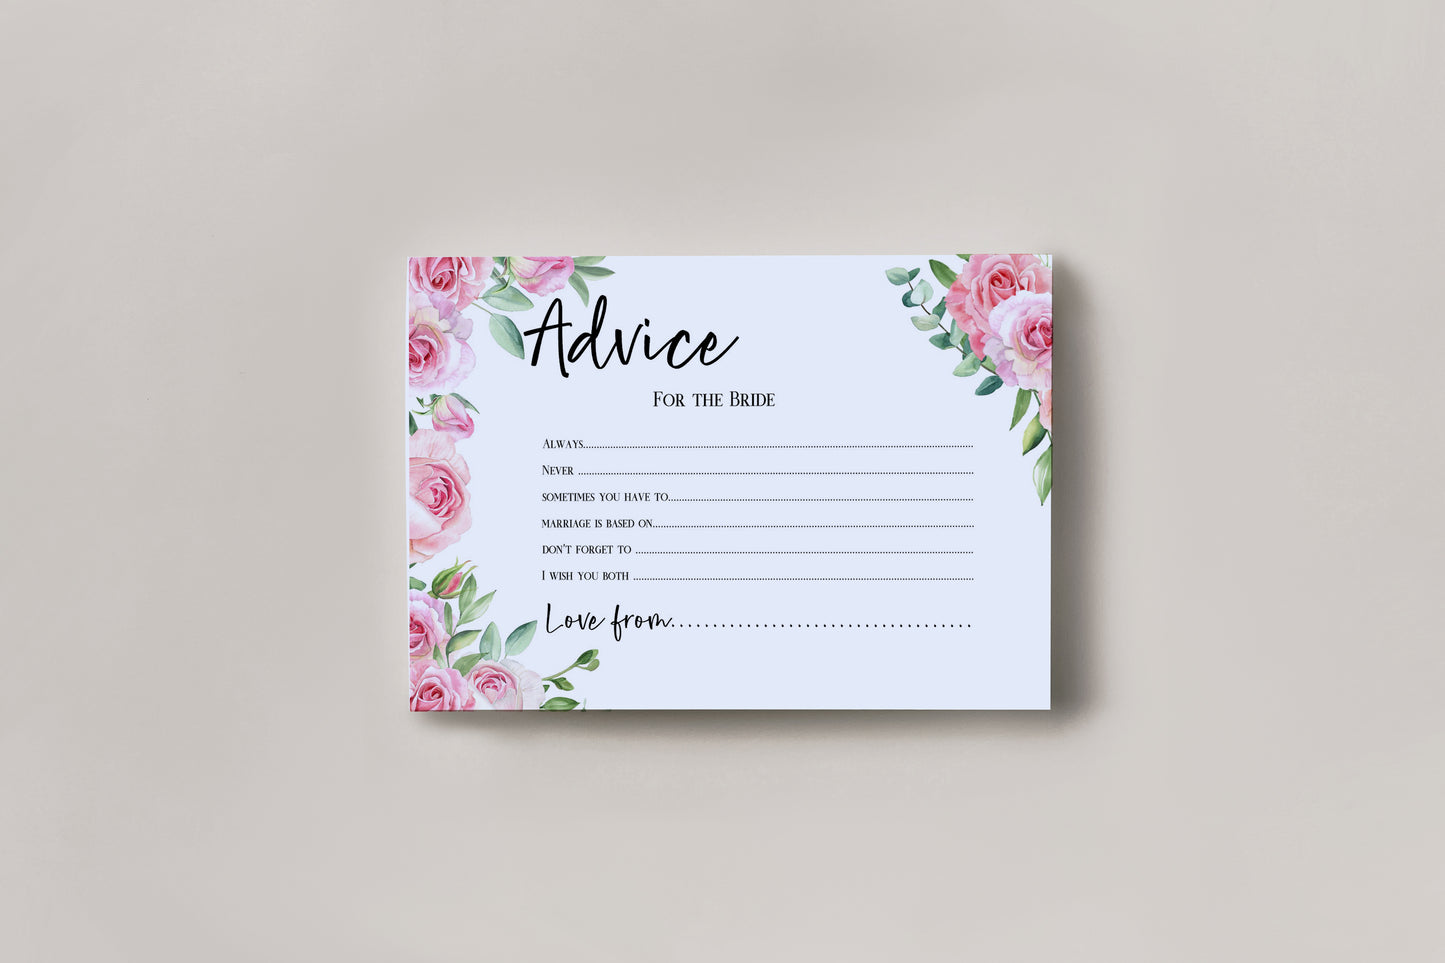 Hen Party Games Advice To The Bride Cards Hen Party Accessories Keepsake Gift Hen Party Games Hen Party Gift Bride To Be Rose Cards